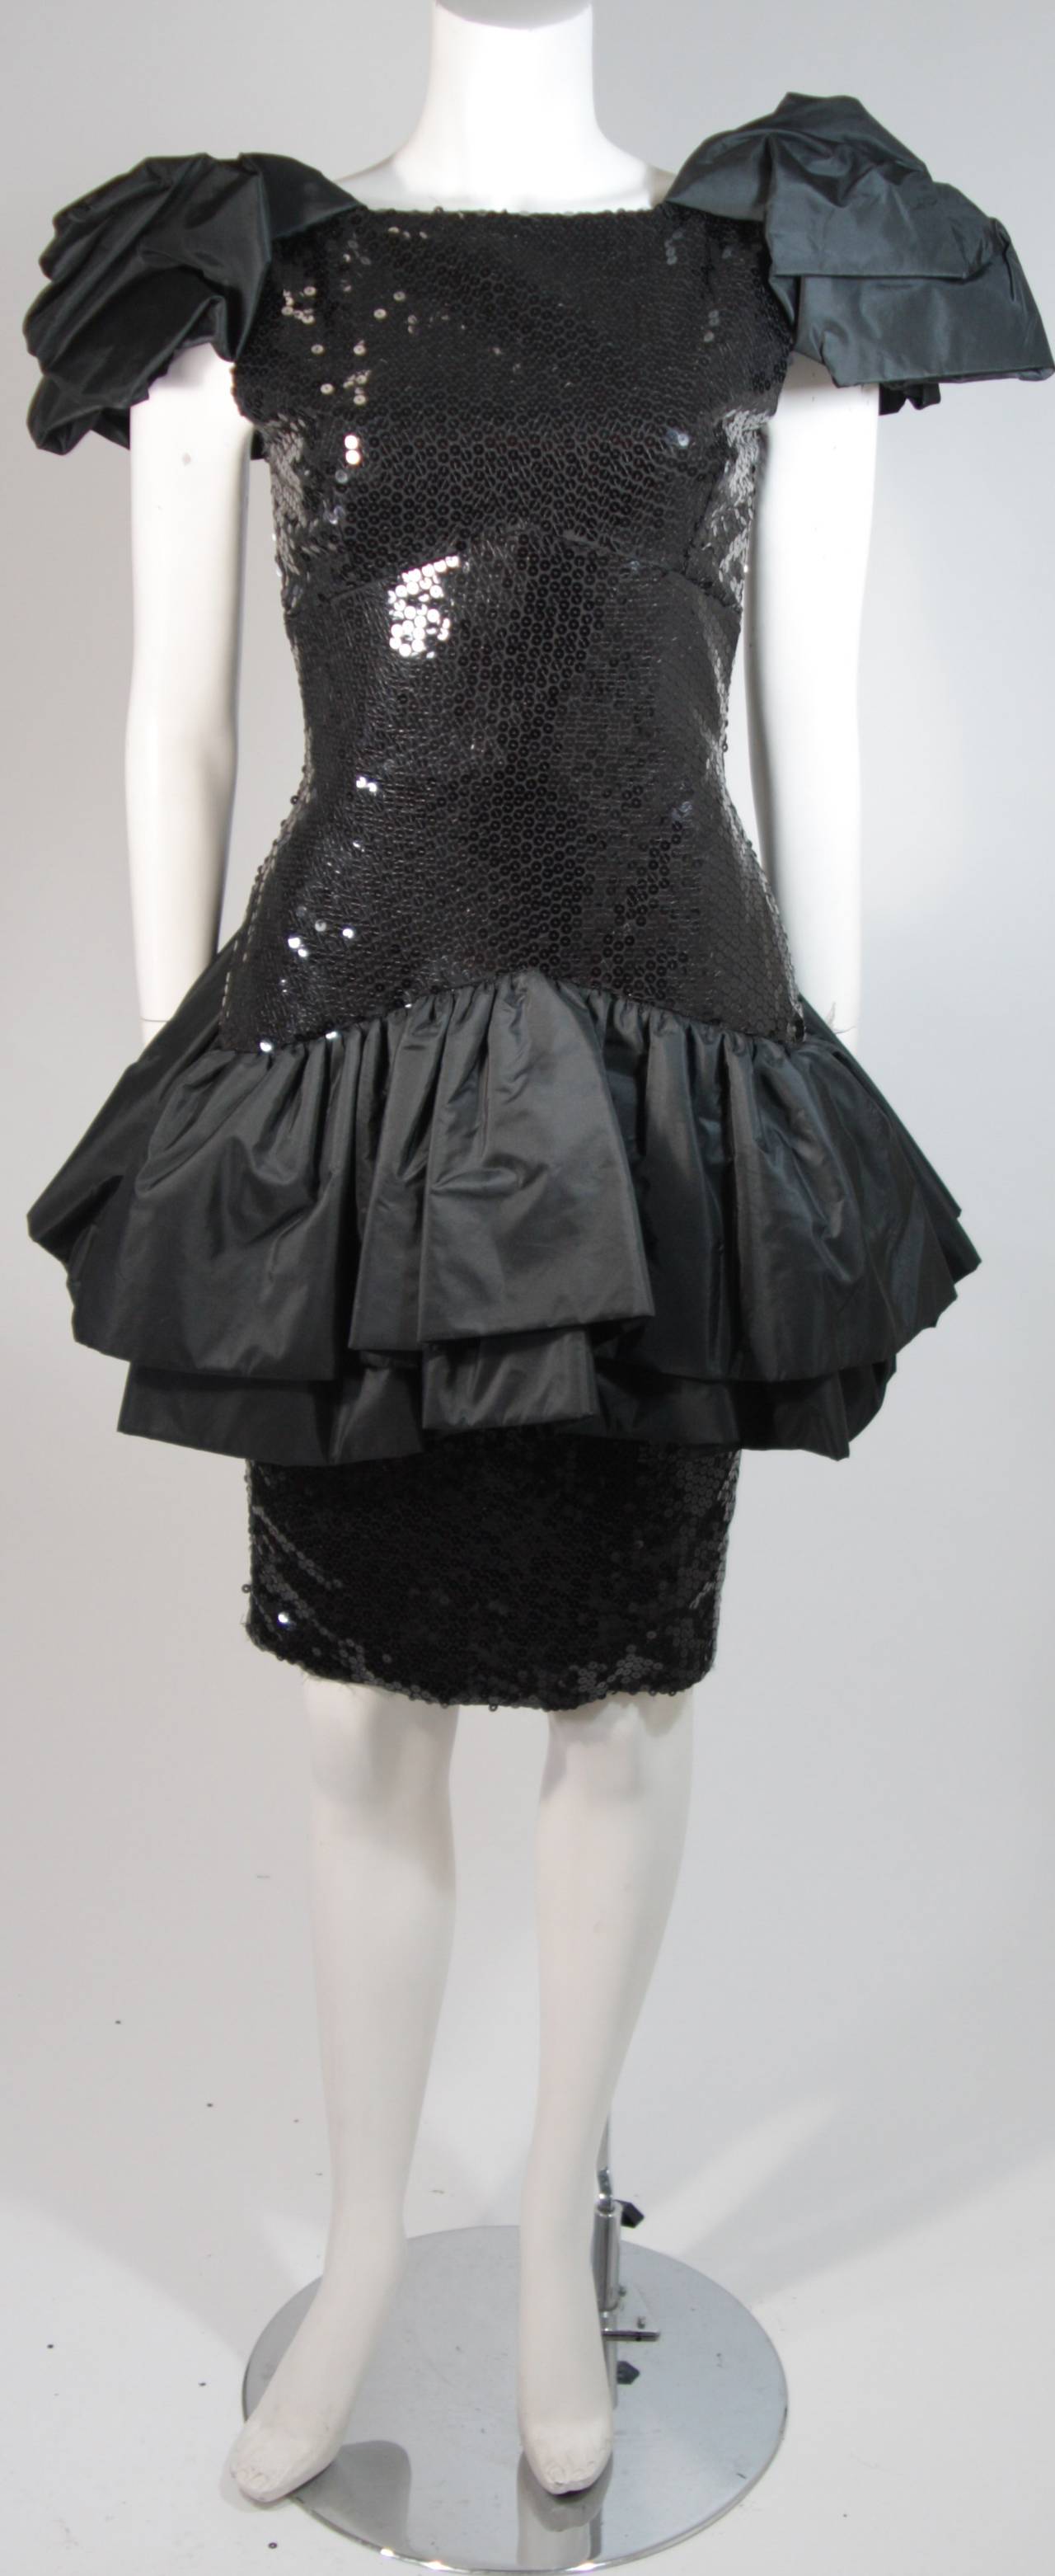 This Vicky Tiel gown is composed of a black silk and a sequined bodice. There are gathers throughout the sleeves and at the hip for a dramatic silhouette. There is a center back zipper closure for ease of access. In excellent condition. Made in